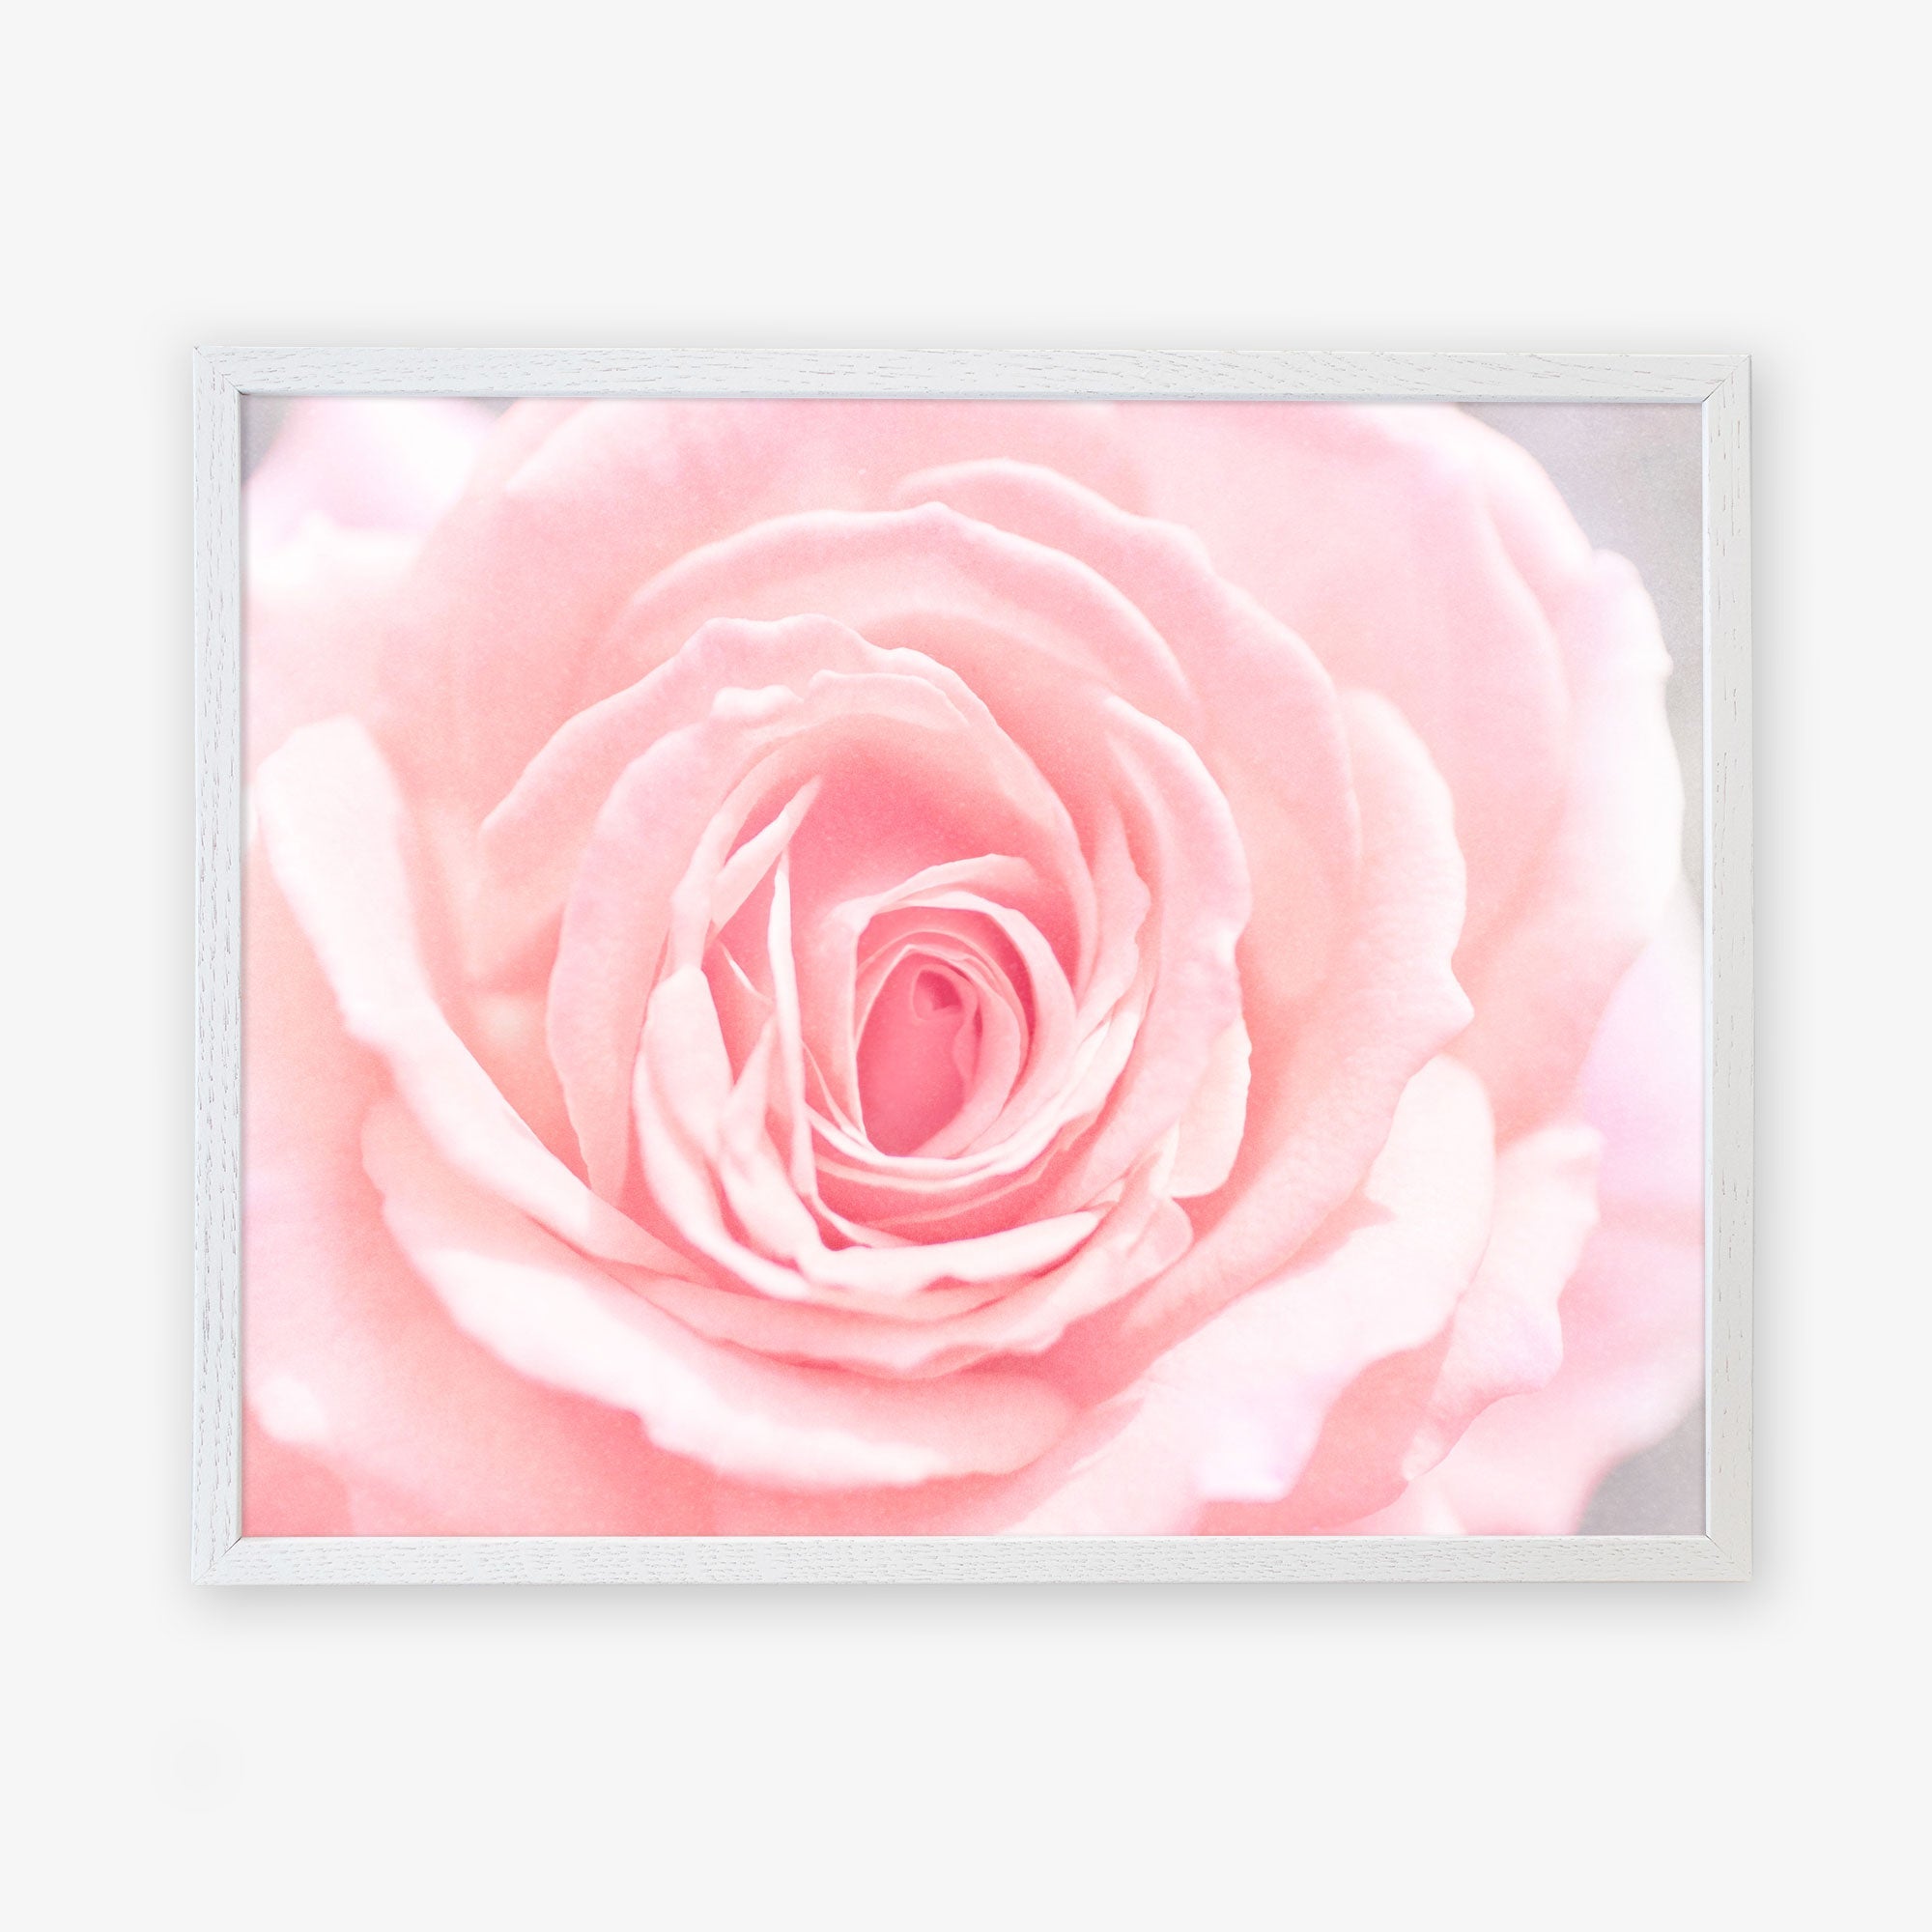 A framed close-up image of a pink rose in bloom with delicate, layered petals, displayed against a lightly textured white background. The rose is centered and fills the frame, presented on archival photographic paper. - Offley Green&#39;s Pink Rose Print, &#39;Pink and Shabby&#39;